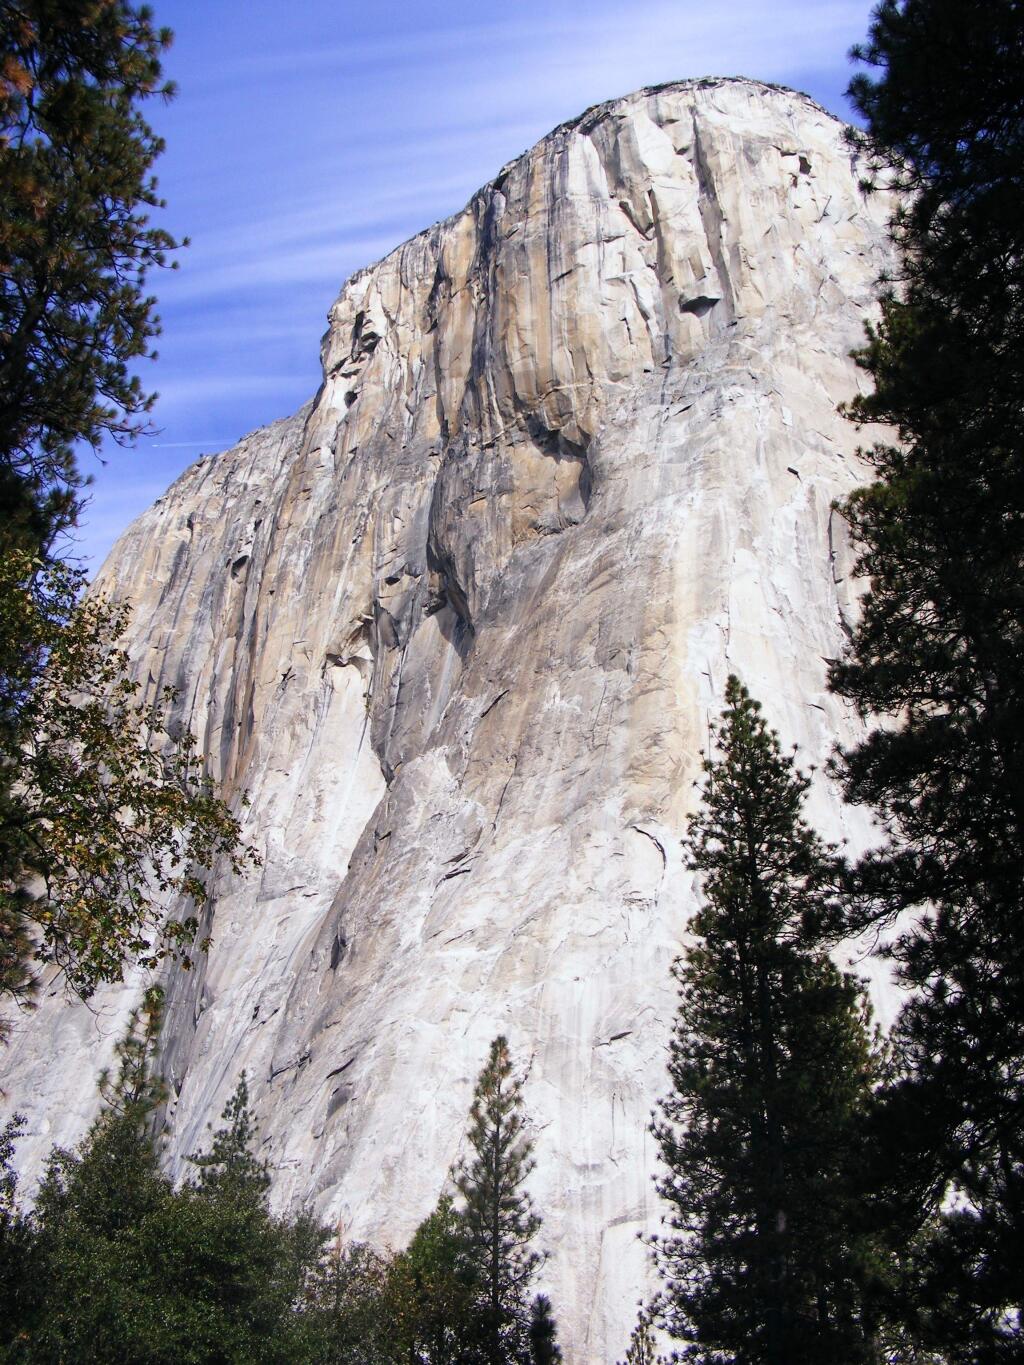 Tracy Salcedo / For The Press DemocratViews of the Nose of El Capitan in Yosemite National Park from the Valley Loop Trail, which is less crowded during the fall.